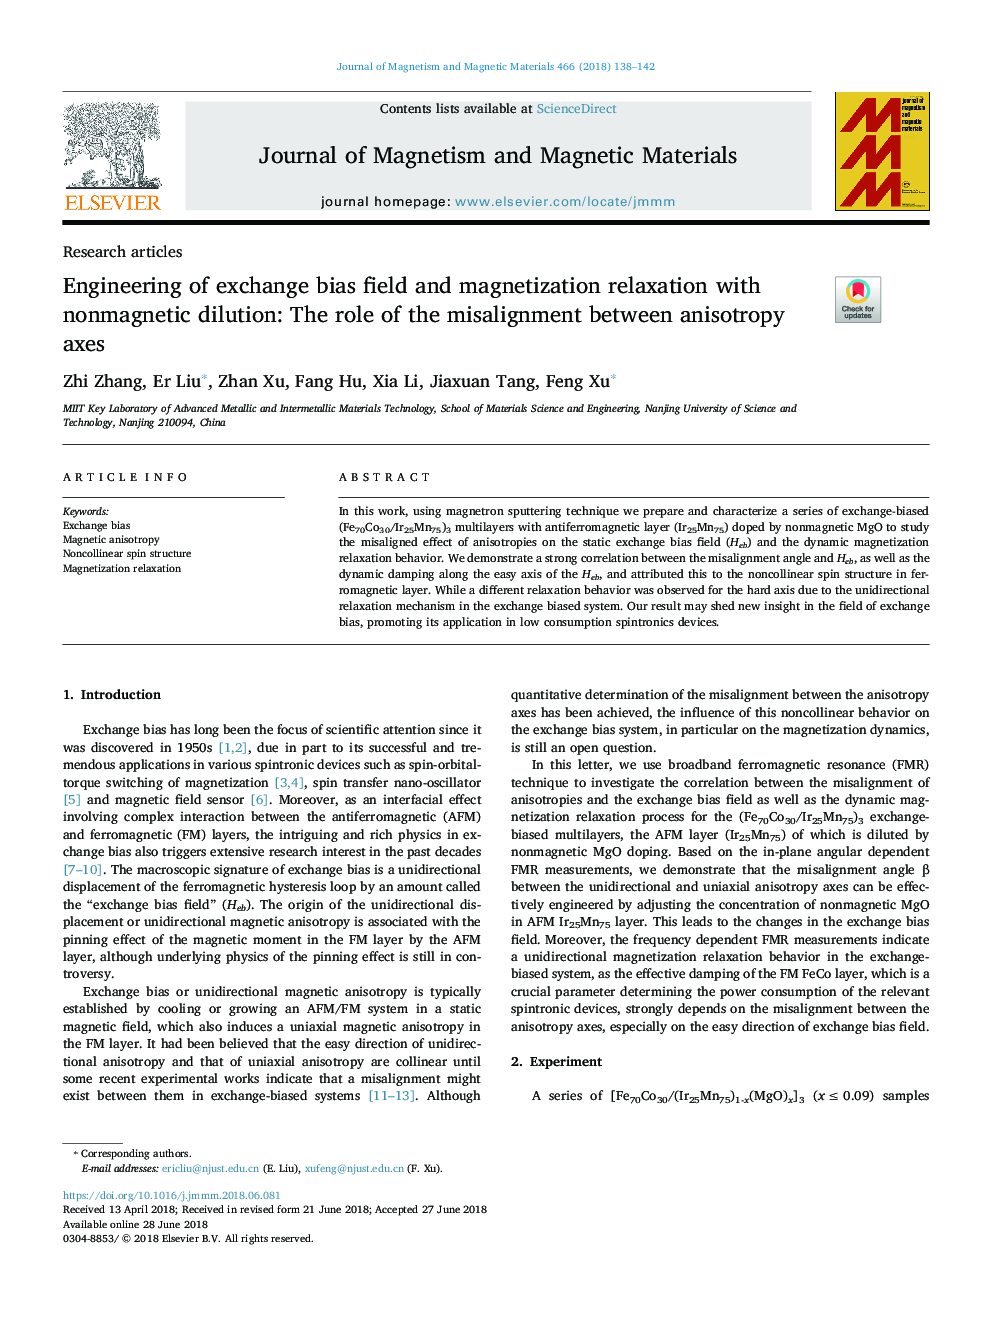 Engineering of exchange bias field and magnetization relaxation with nonmagnetic dilution: The role of the misalignment between anisotropy axes